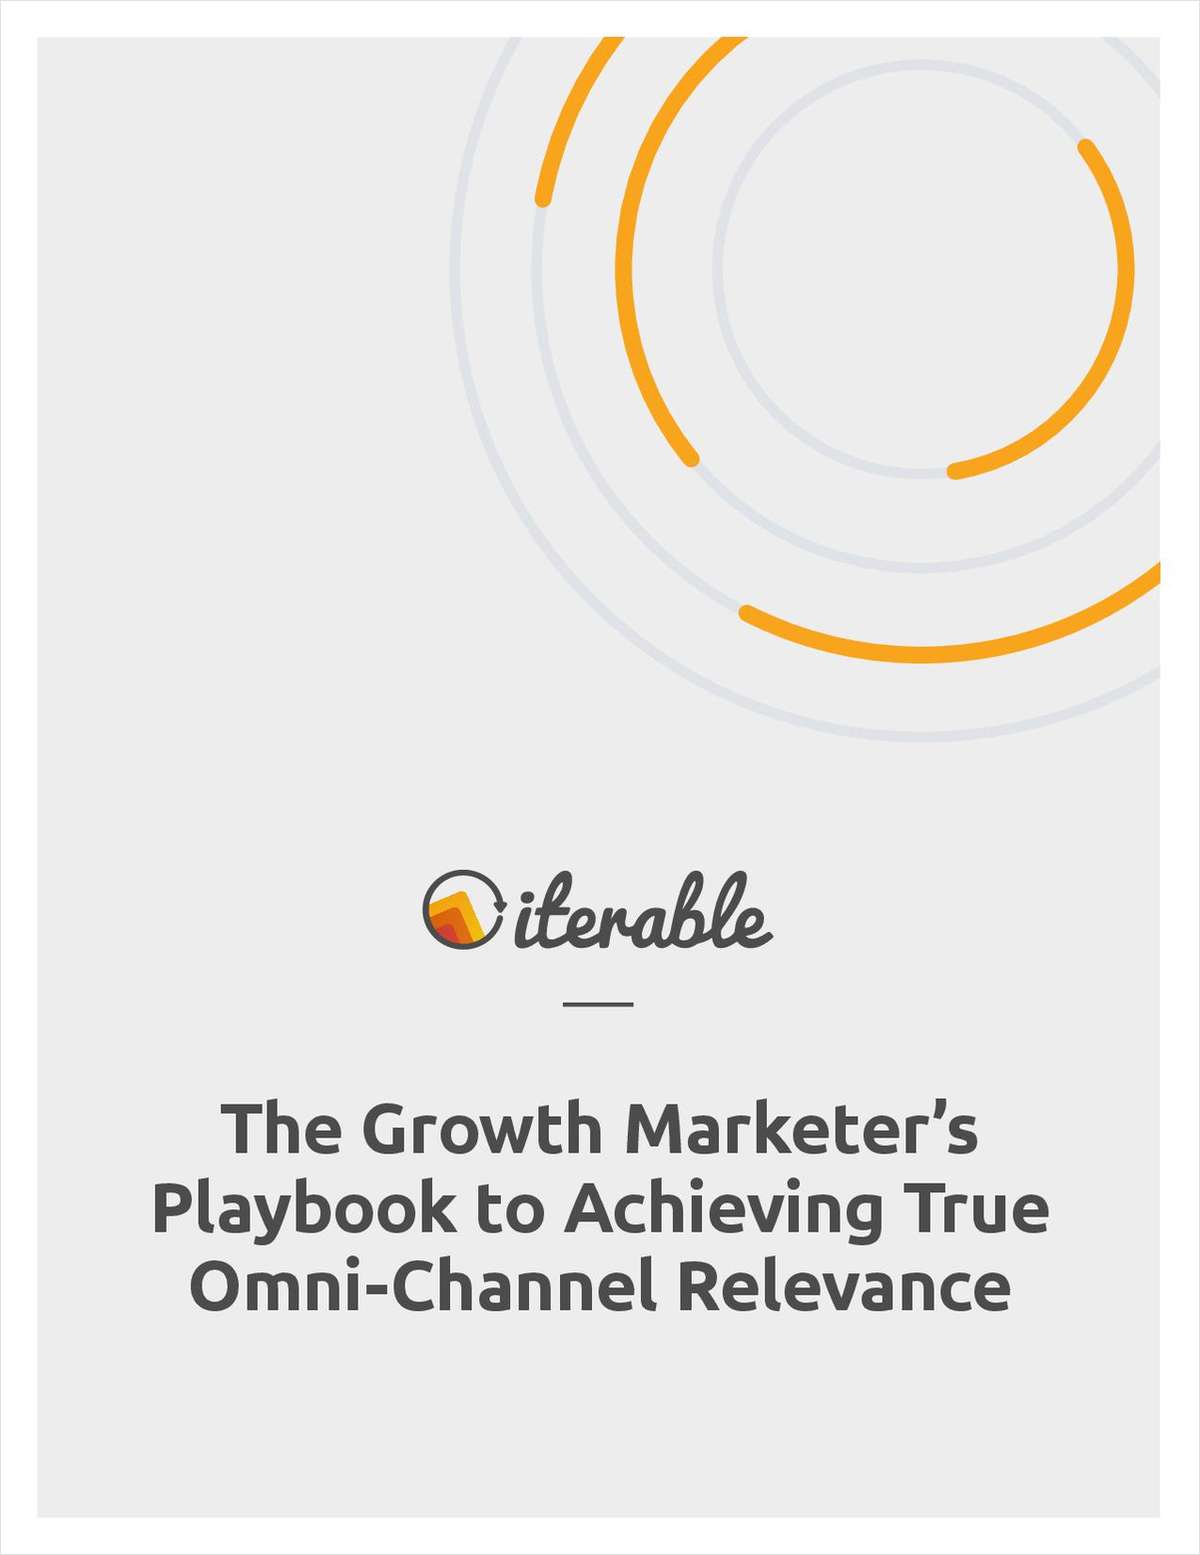 Achieving True Omni-Channel Relevance at Scale: The Growth Marketer's Playbook